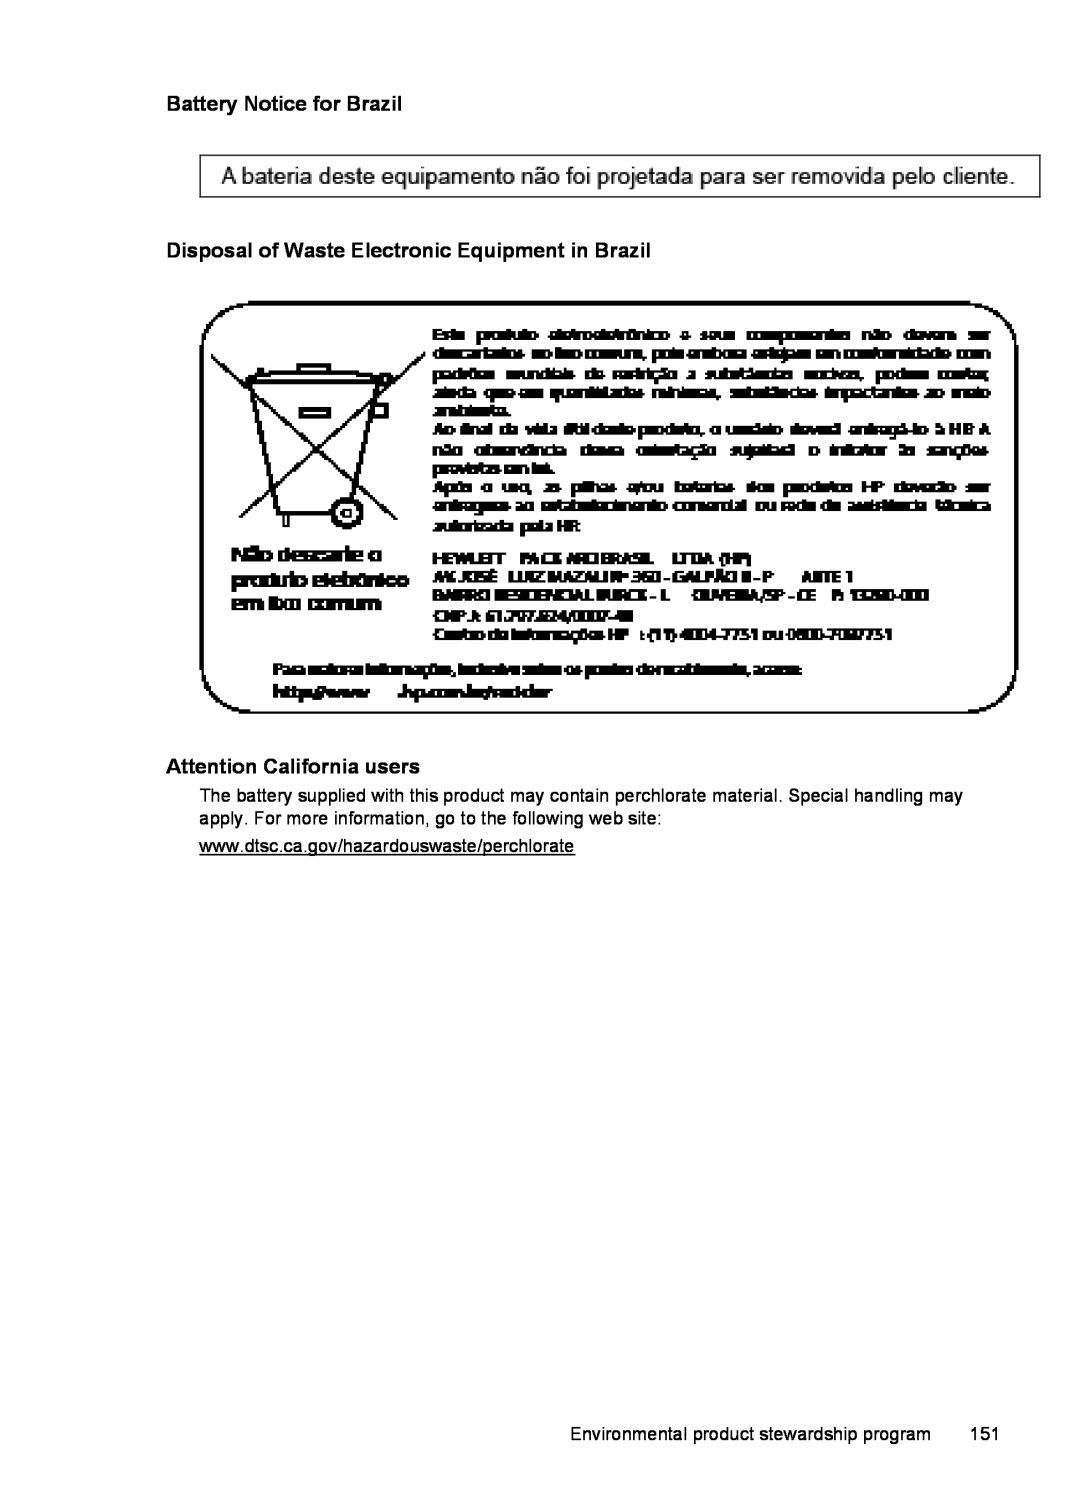 HP 6600 - H7 manual Battery Notice for Brazil, Disposal of Waste Electronic Equipment in Brazil, Attention California users 